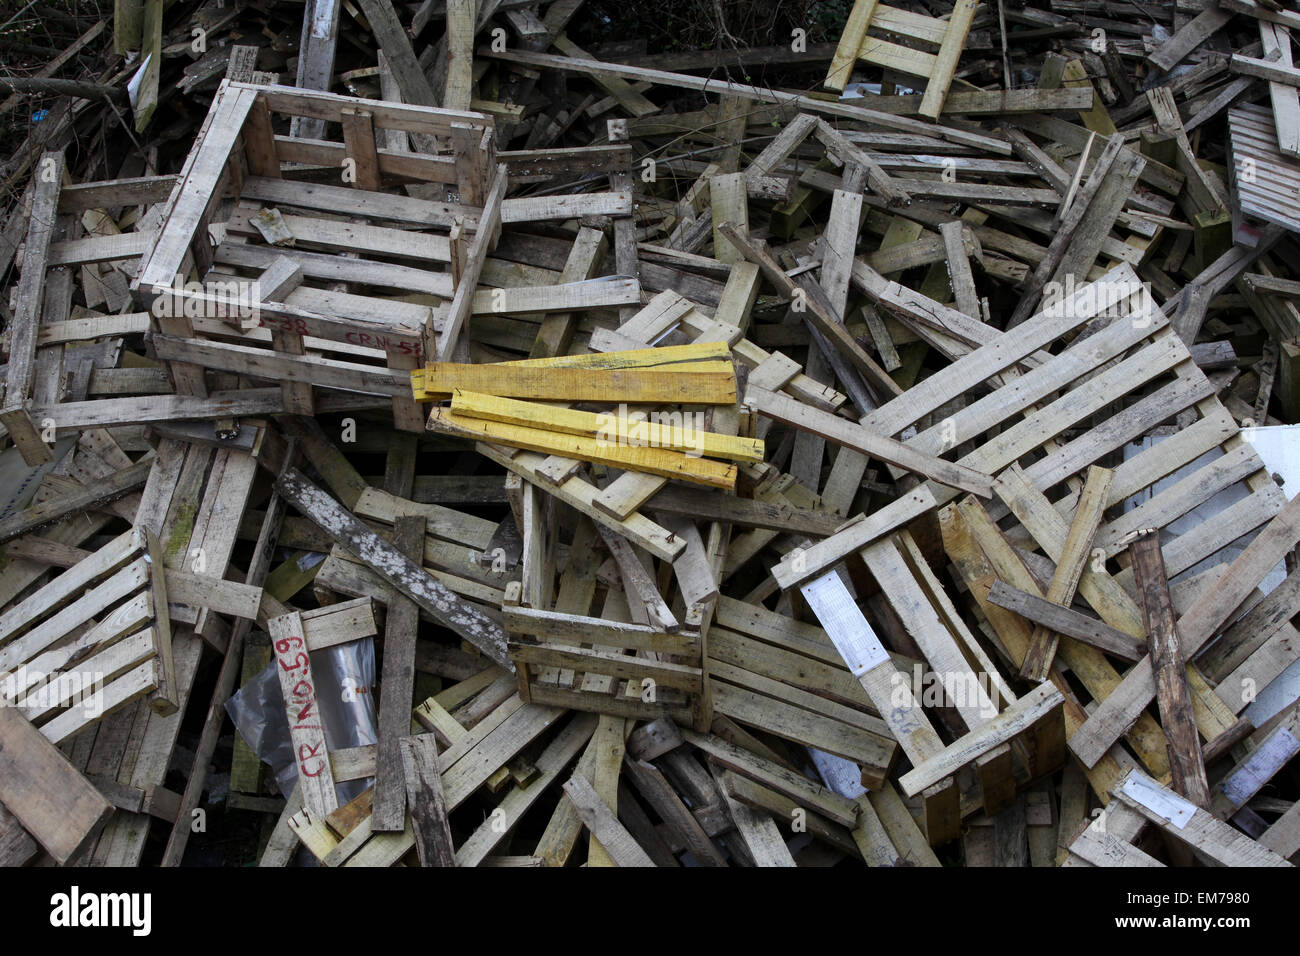 Pile of broken wooded pallets Stock Photo